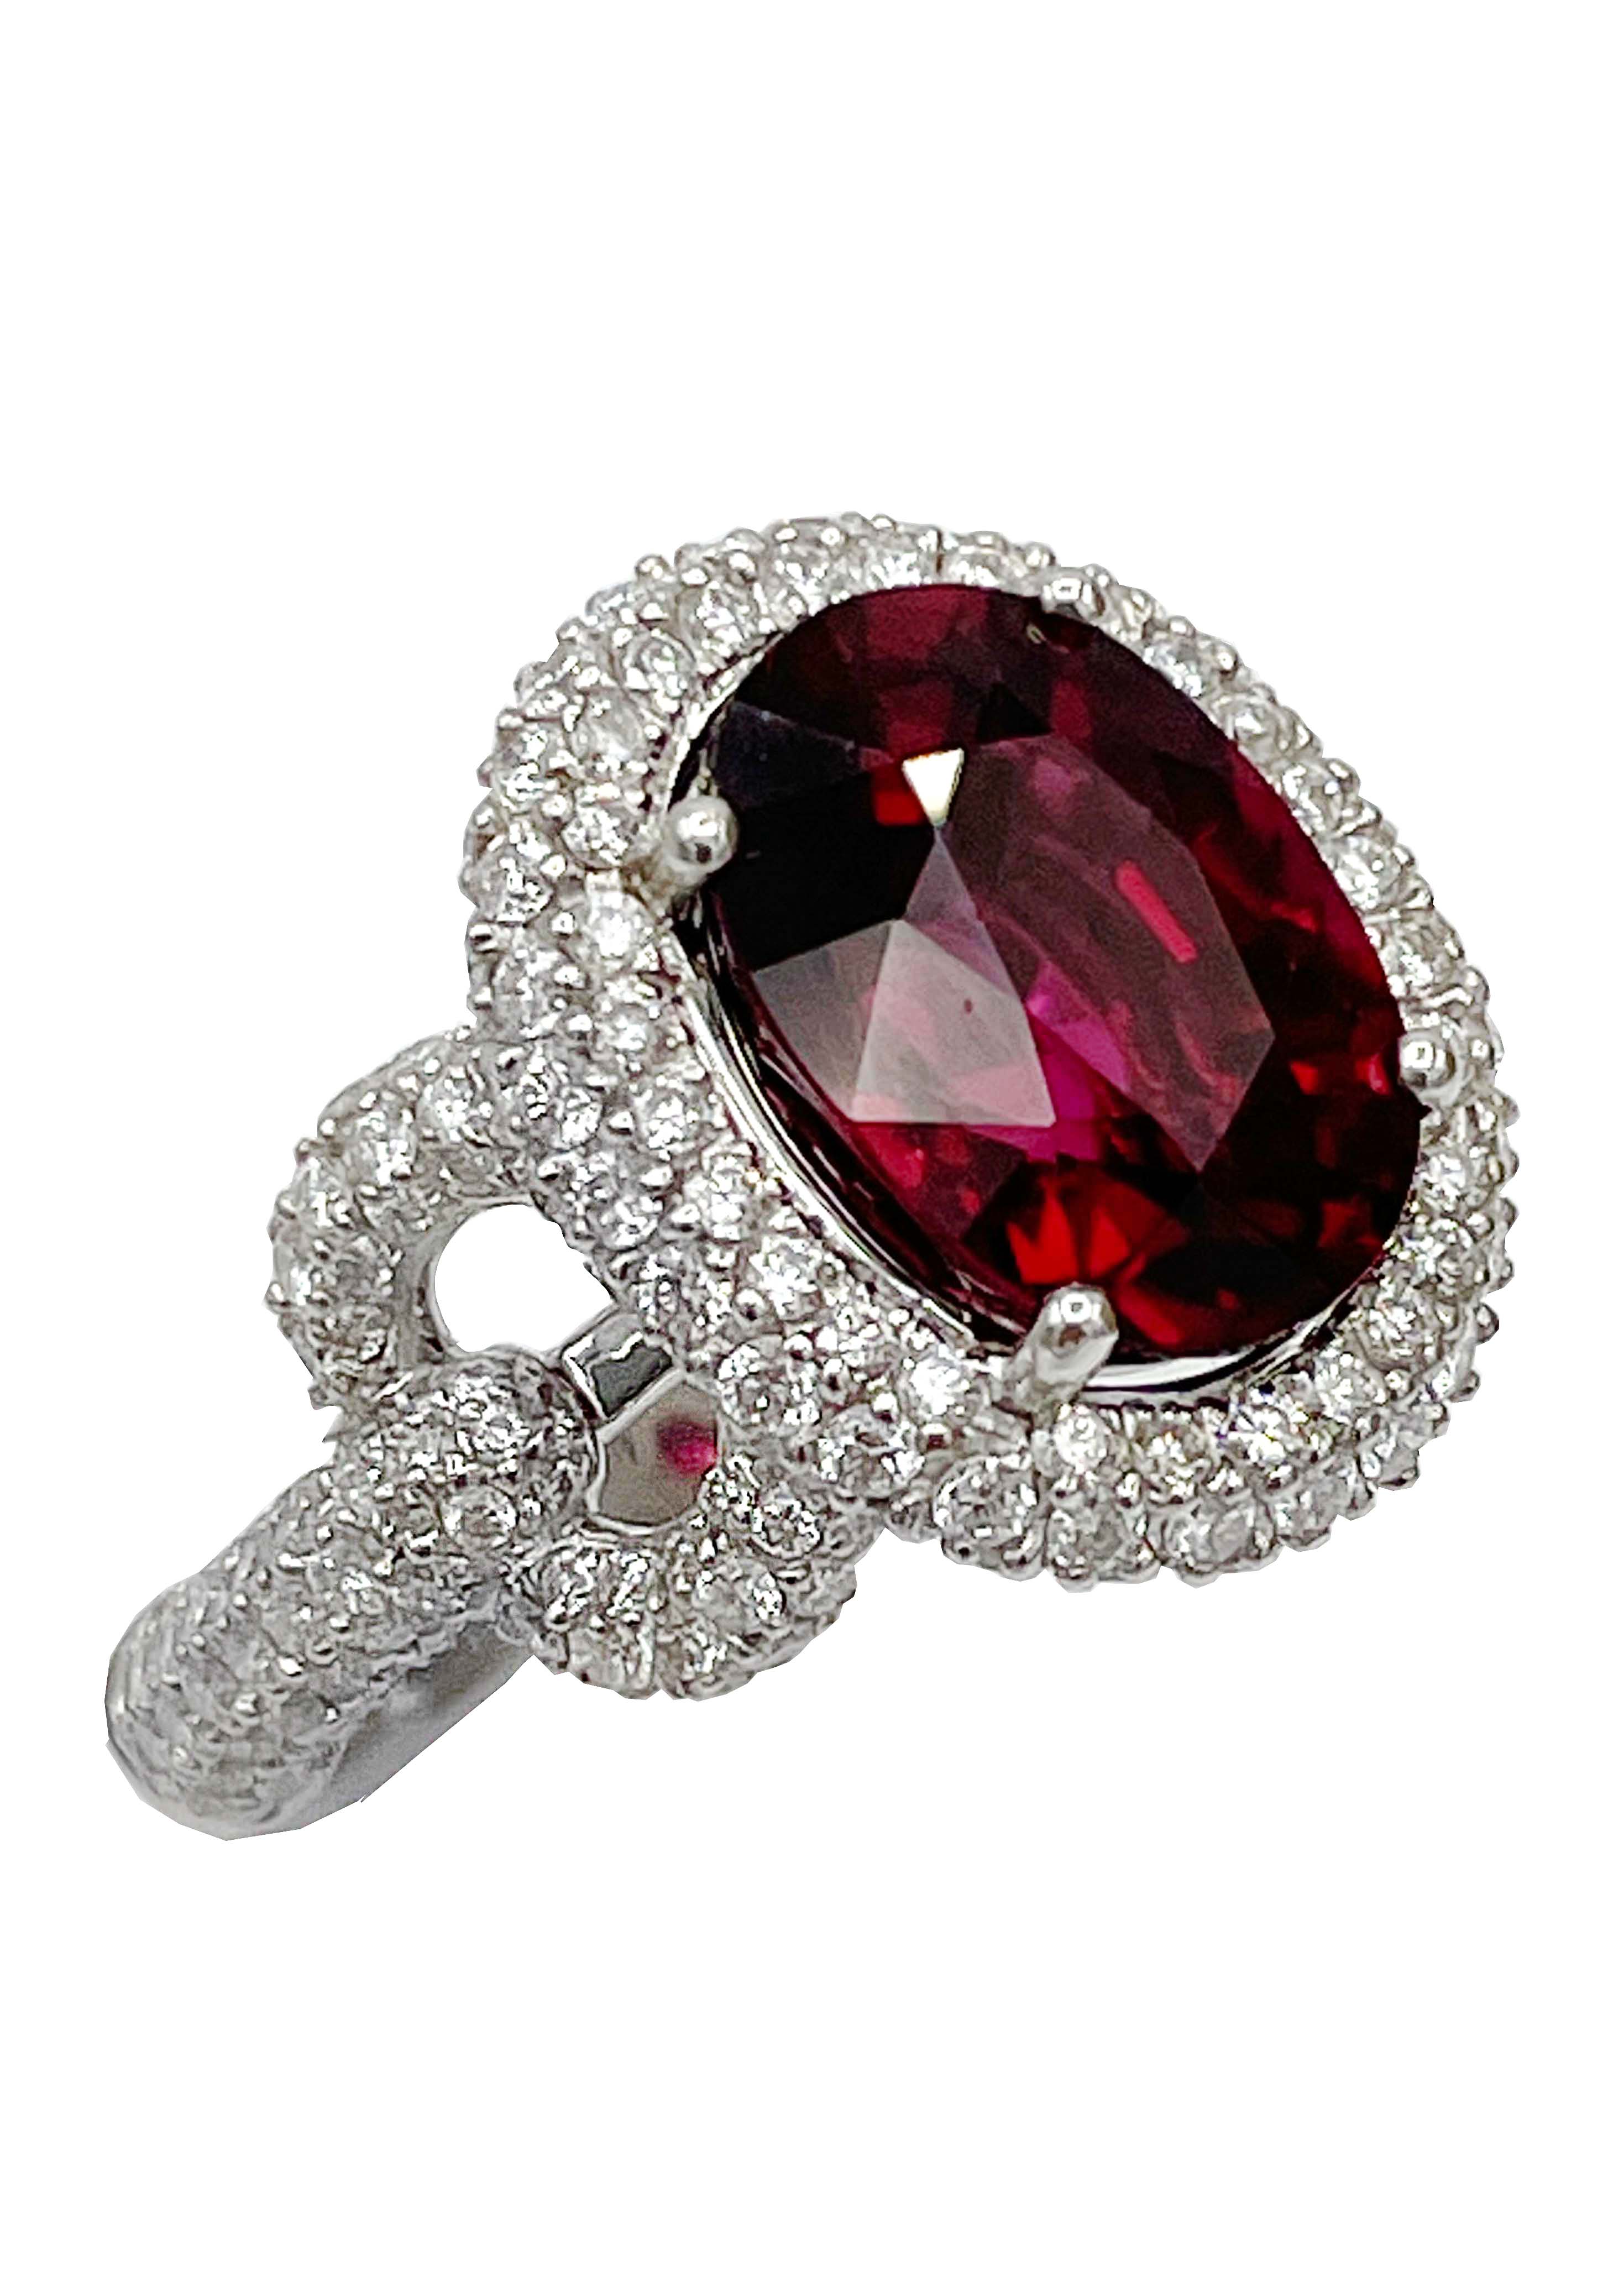 18k White Gold Diamonds and Ruby Ring Image